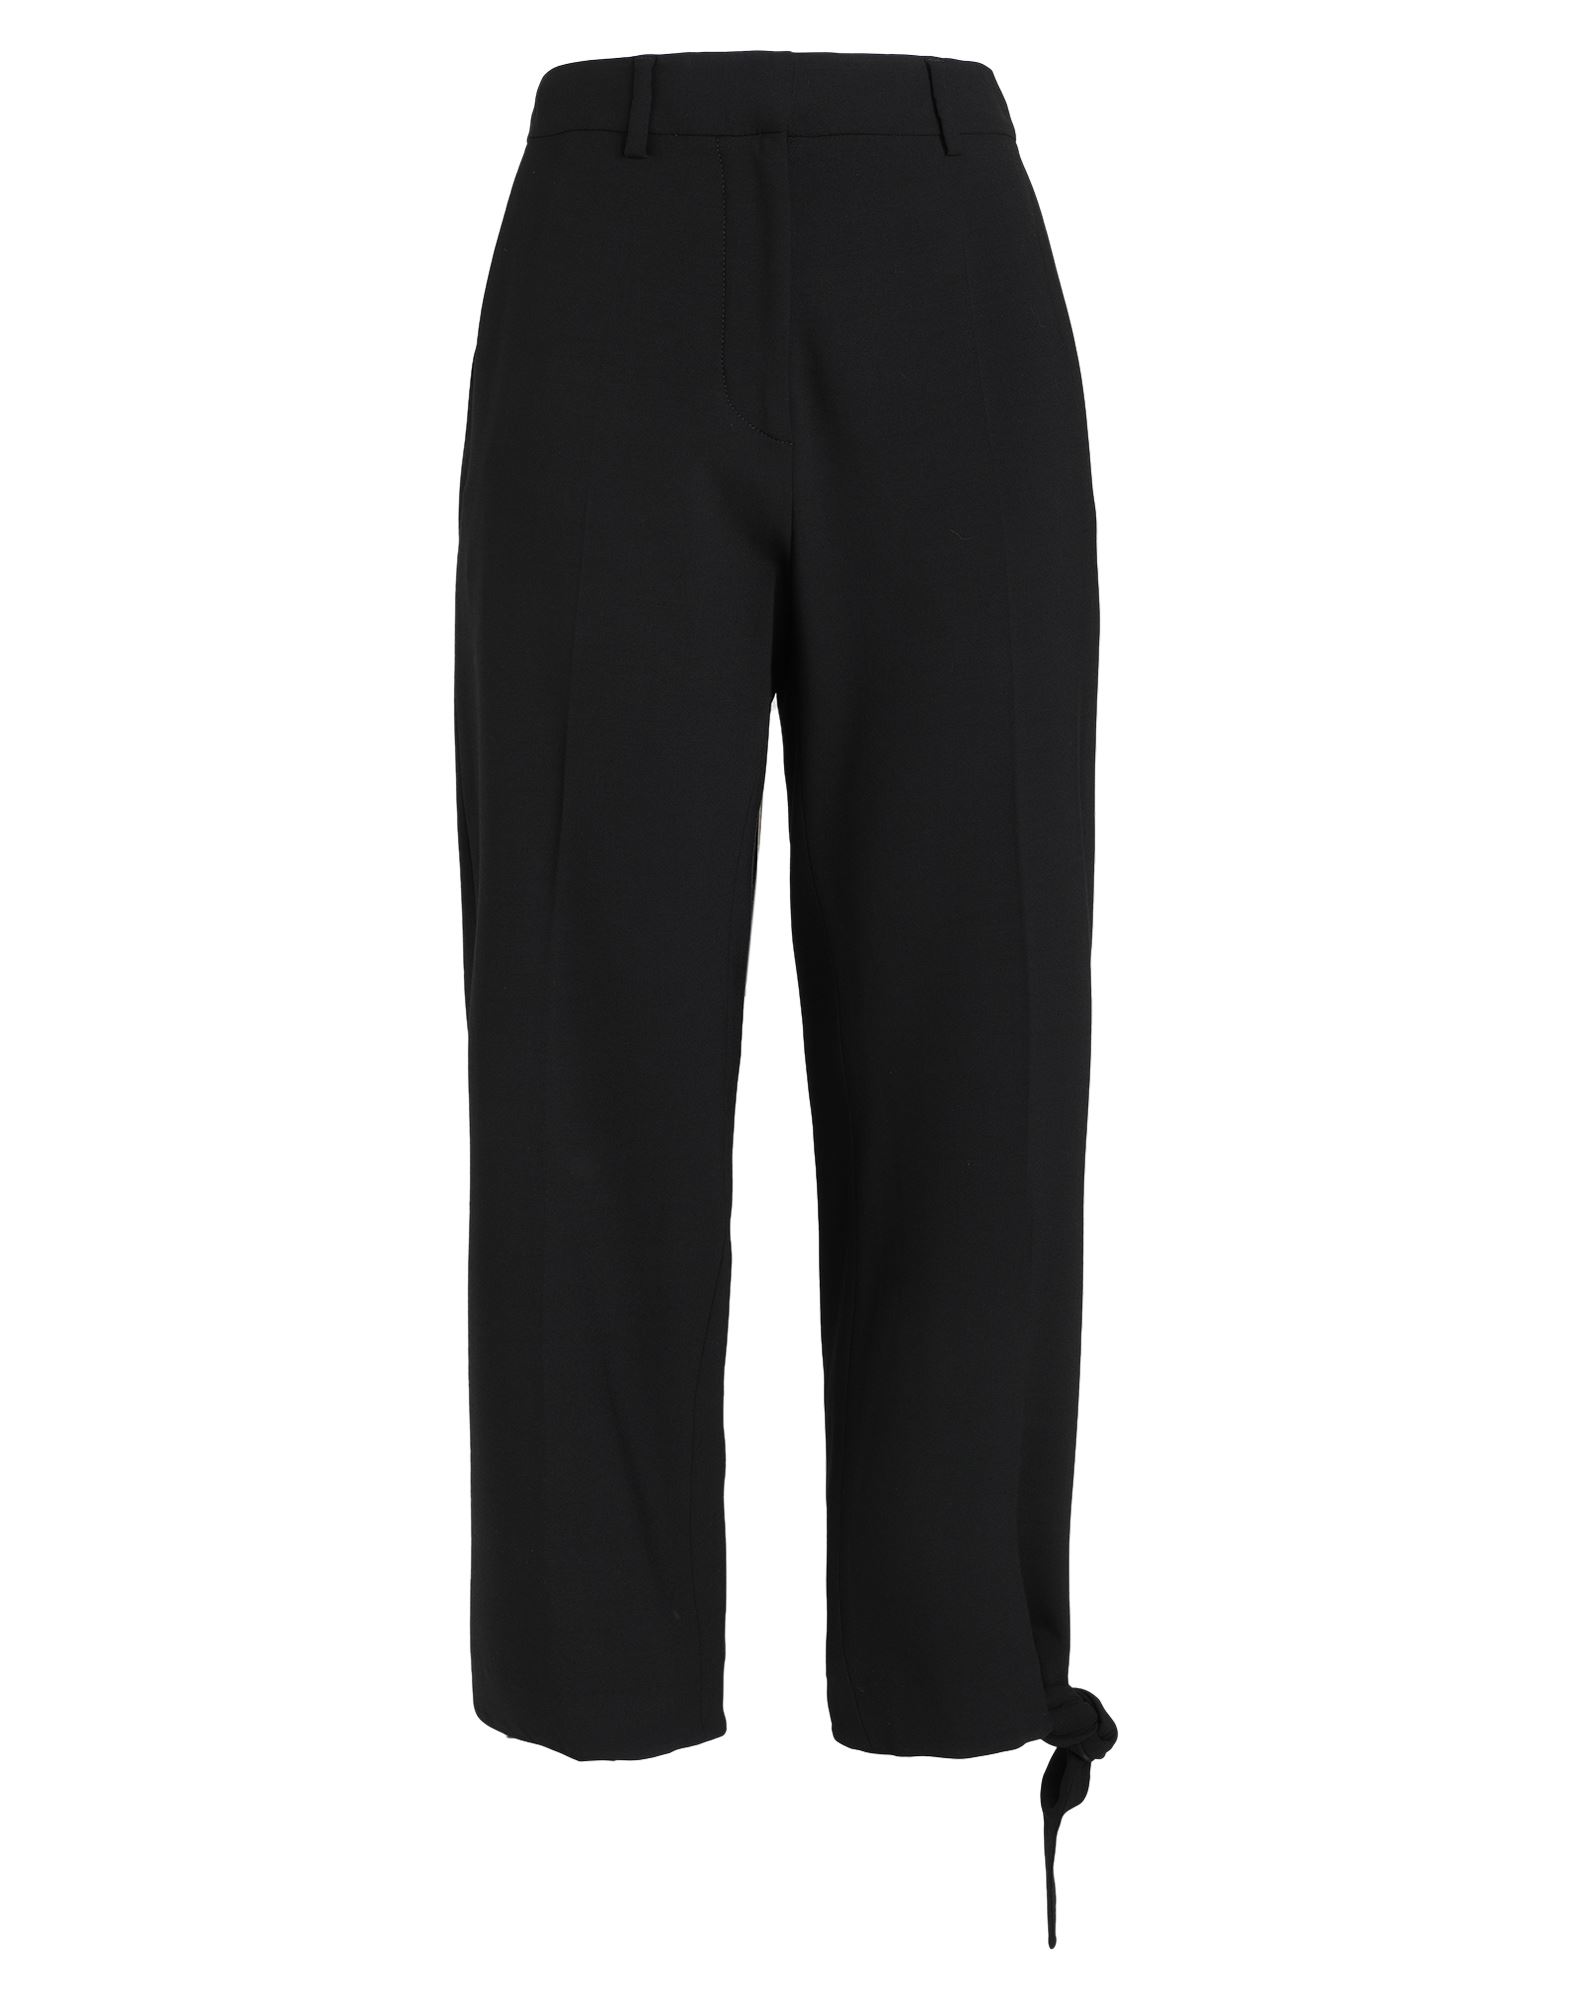 JW ANDERSON Casual pants,13174393PS 5